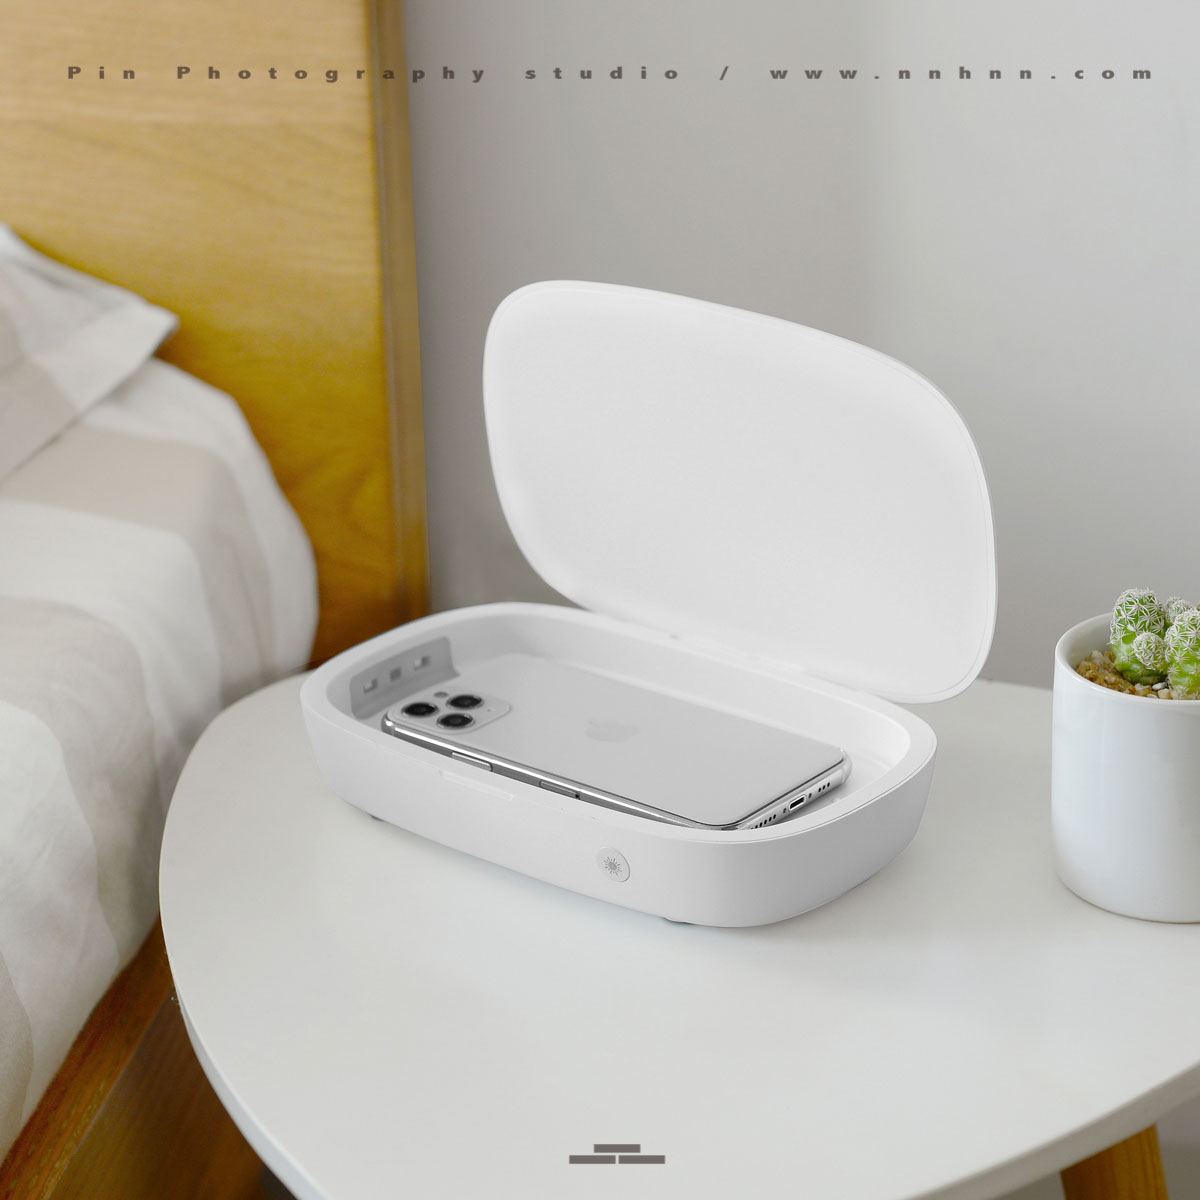 Amazon products in China Life style The disinfection box is at the head of the bed.